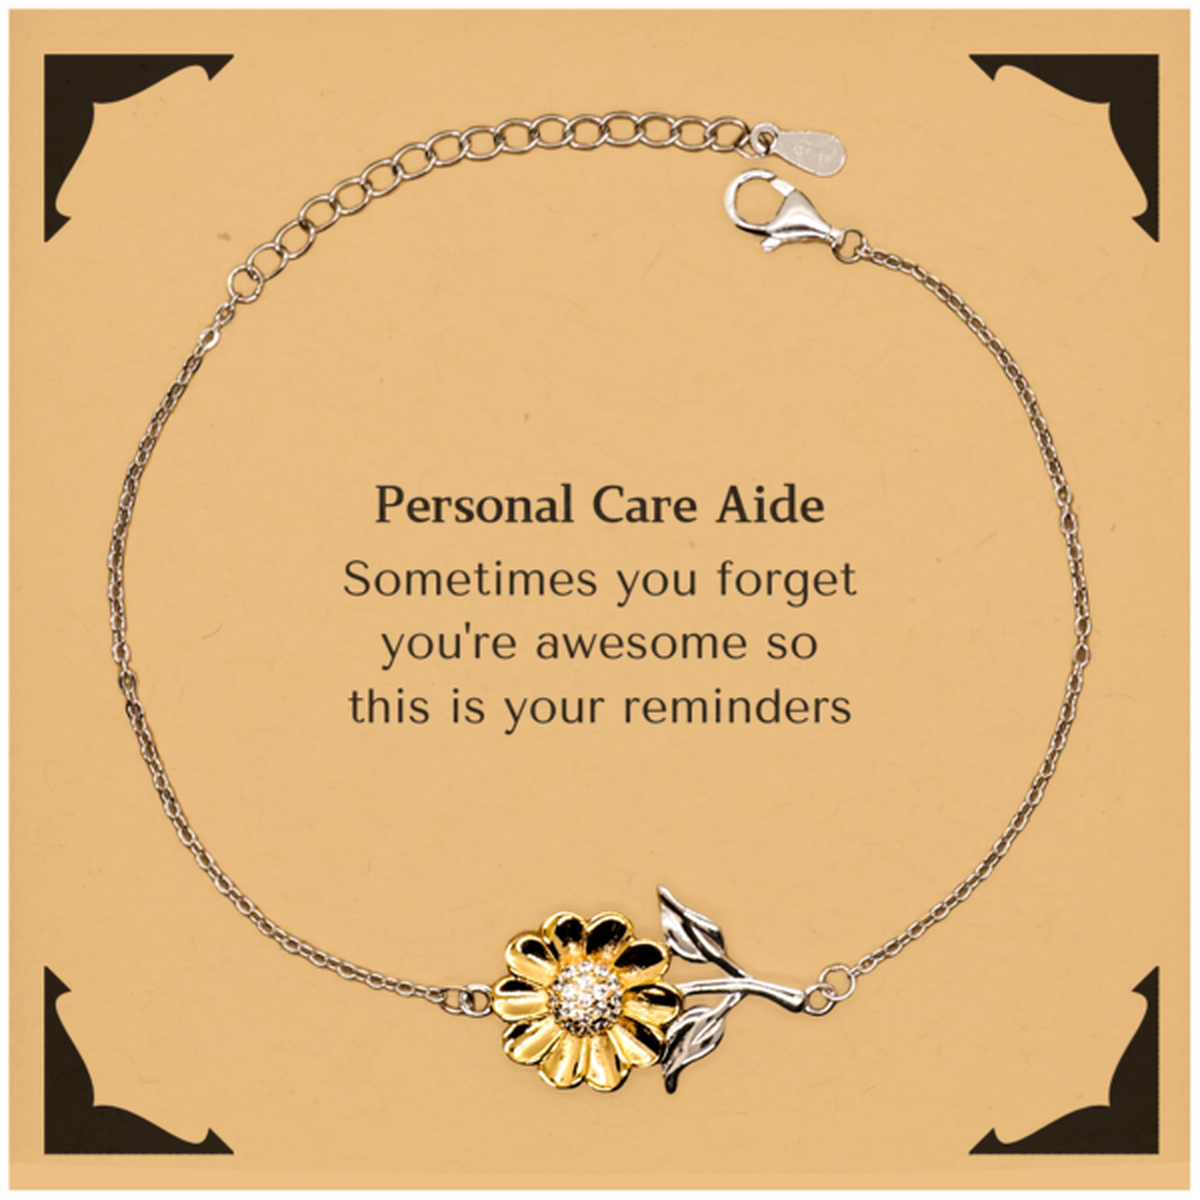 Sentimental Personal Care Aide Sunflower Bracelet, Personal Care Aide Sometimes you forget you're awesome so this is your reminders, Graduation Christmas Birthday Gifts for Personal Care Aide, Men, Women, Coworkers